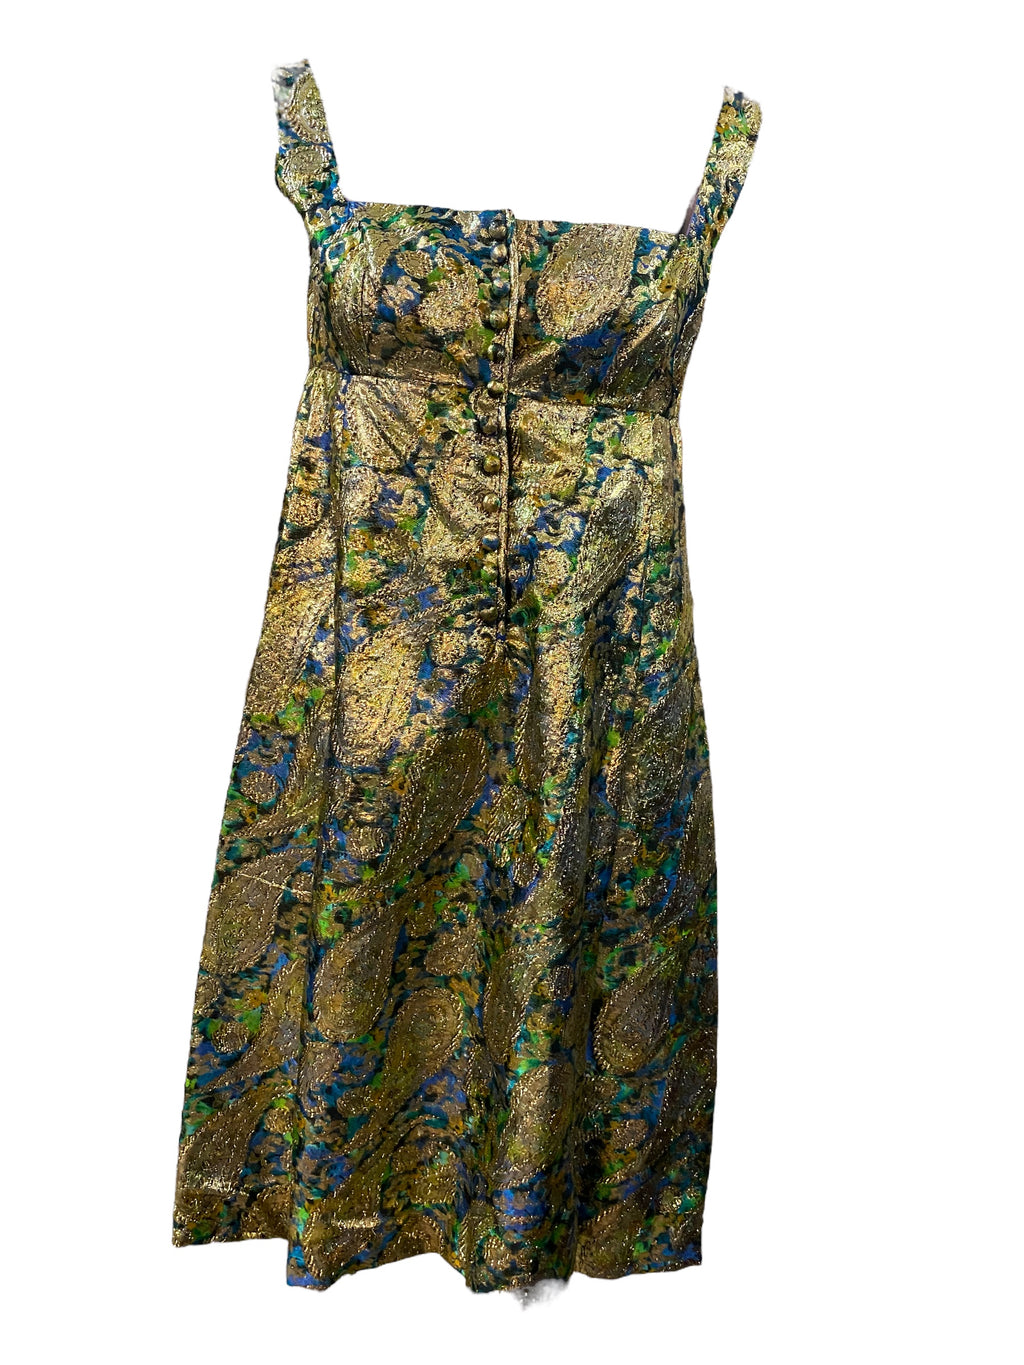 Saks Fifth Avenue 60s Psychedelic  Gold Lame Paisley Mini Dress FRONT 1 of 6